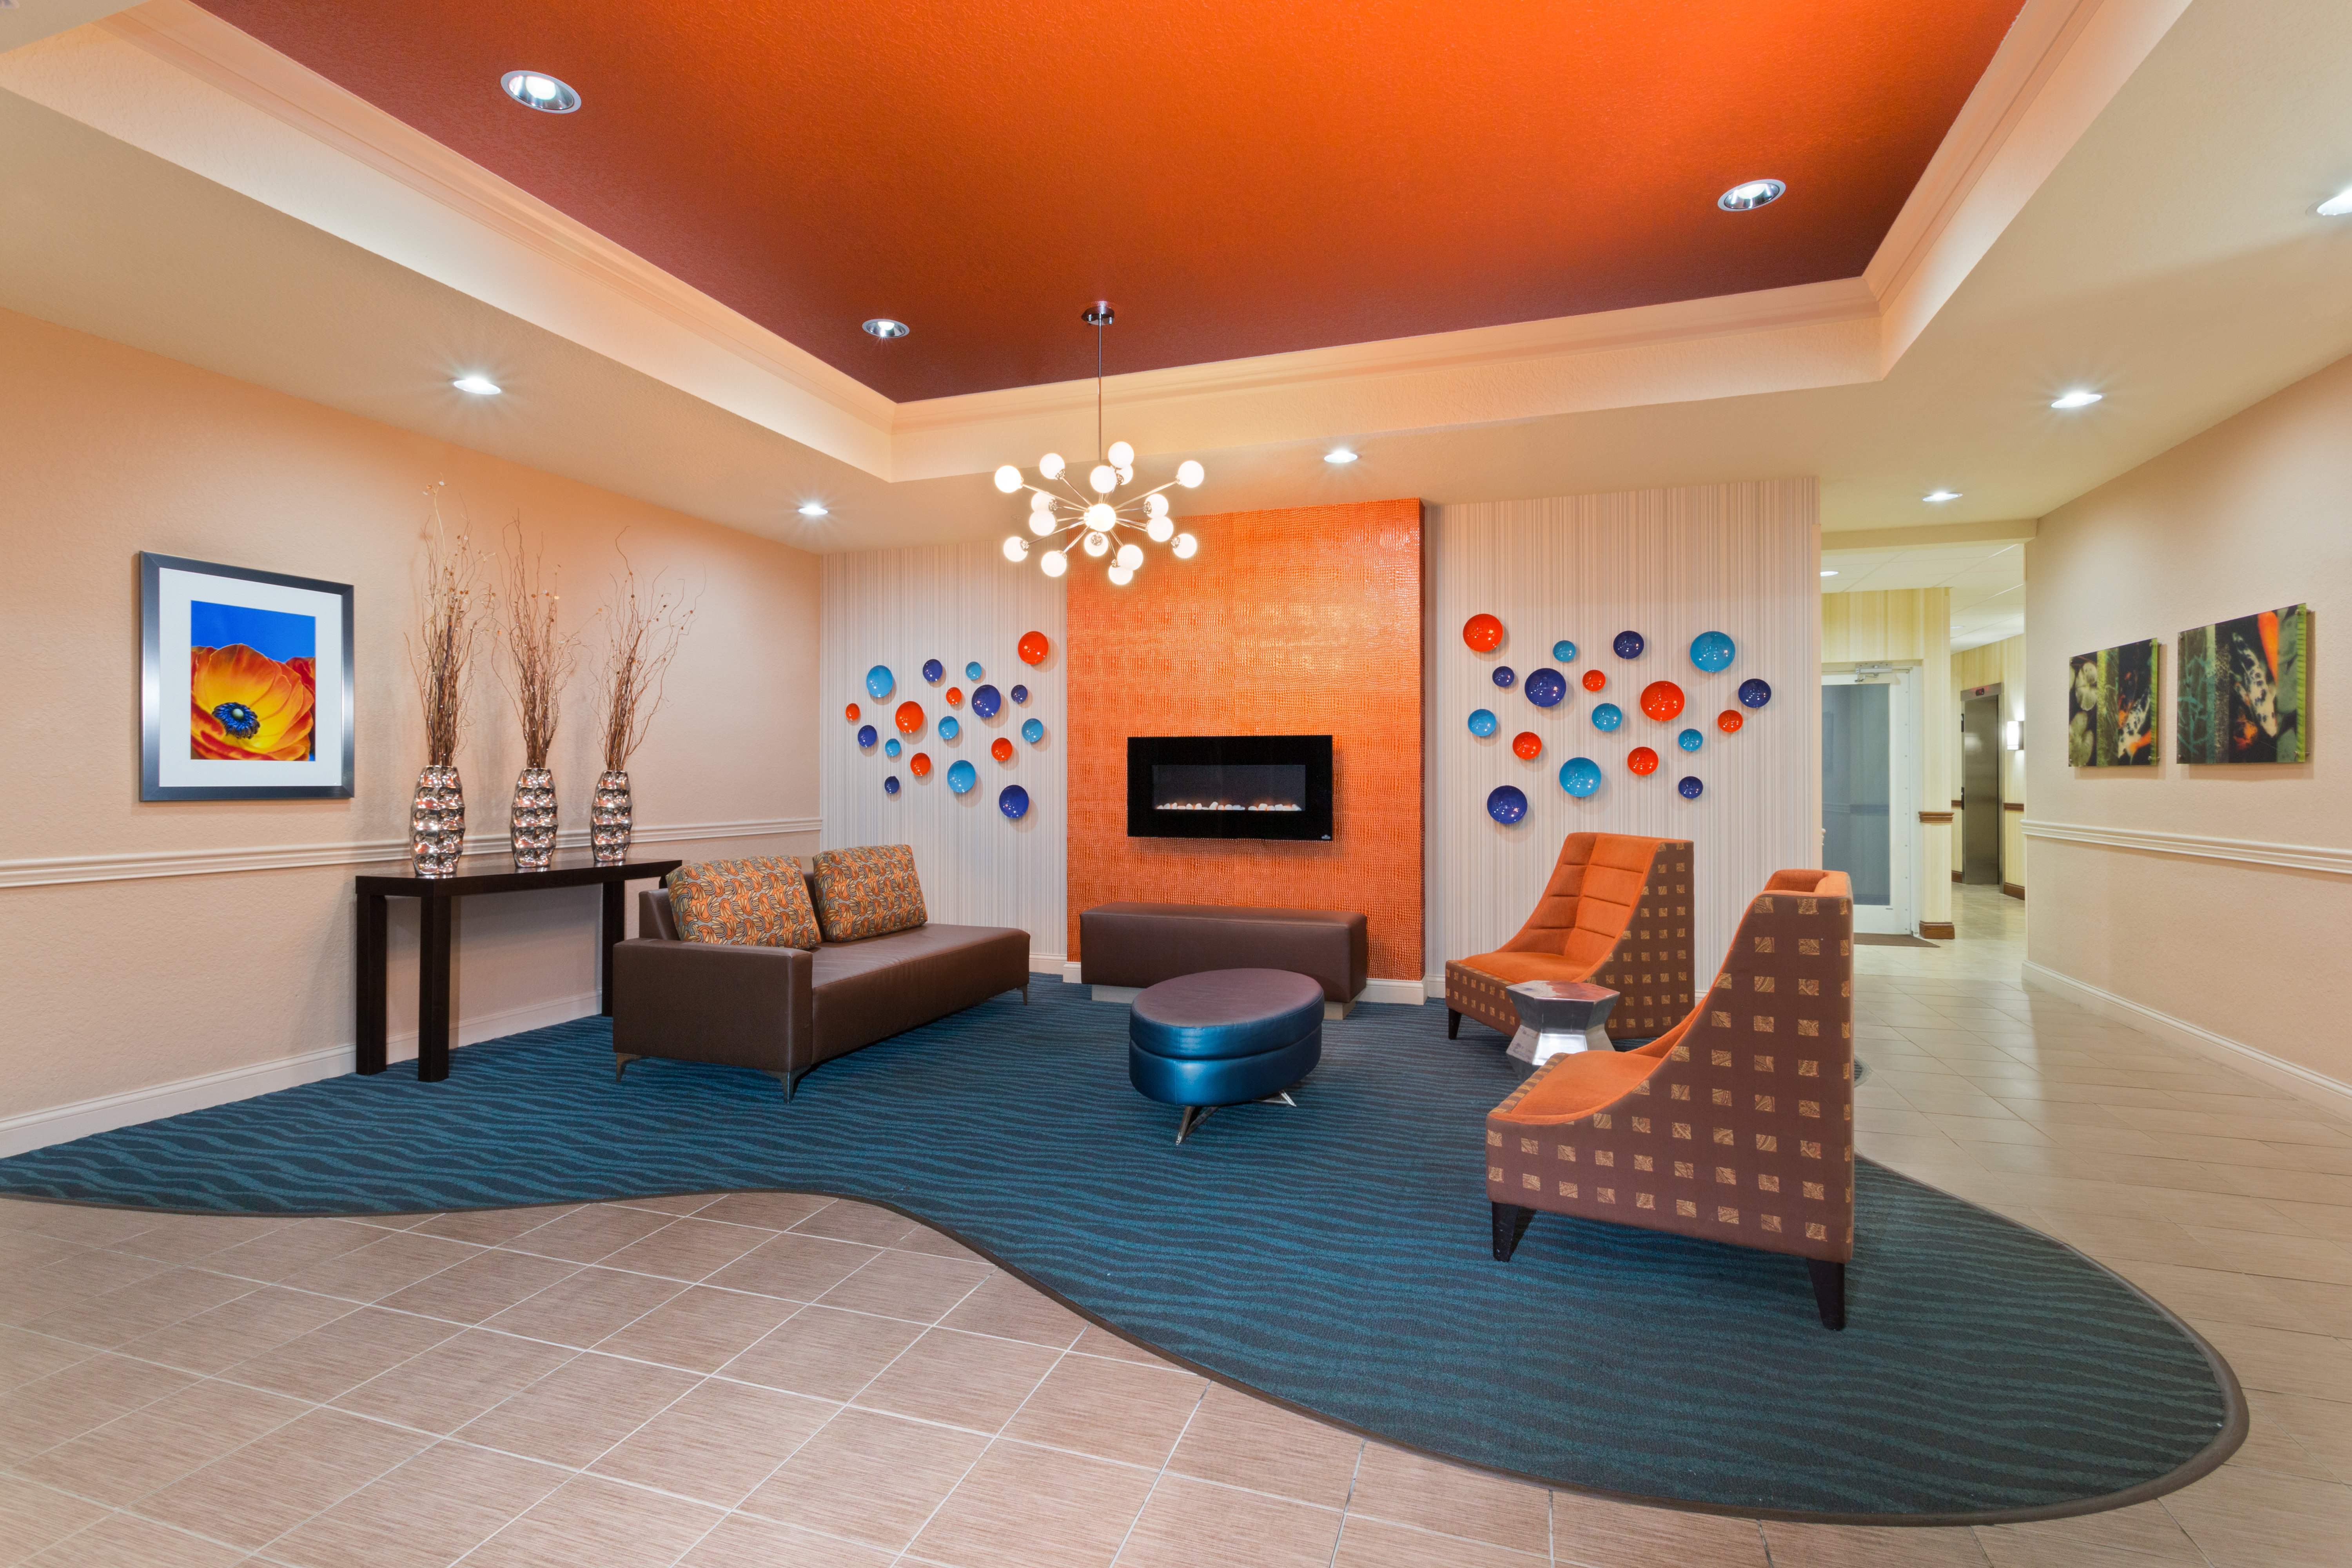 Our lobby is a great place to mingle with friends and family.